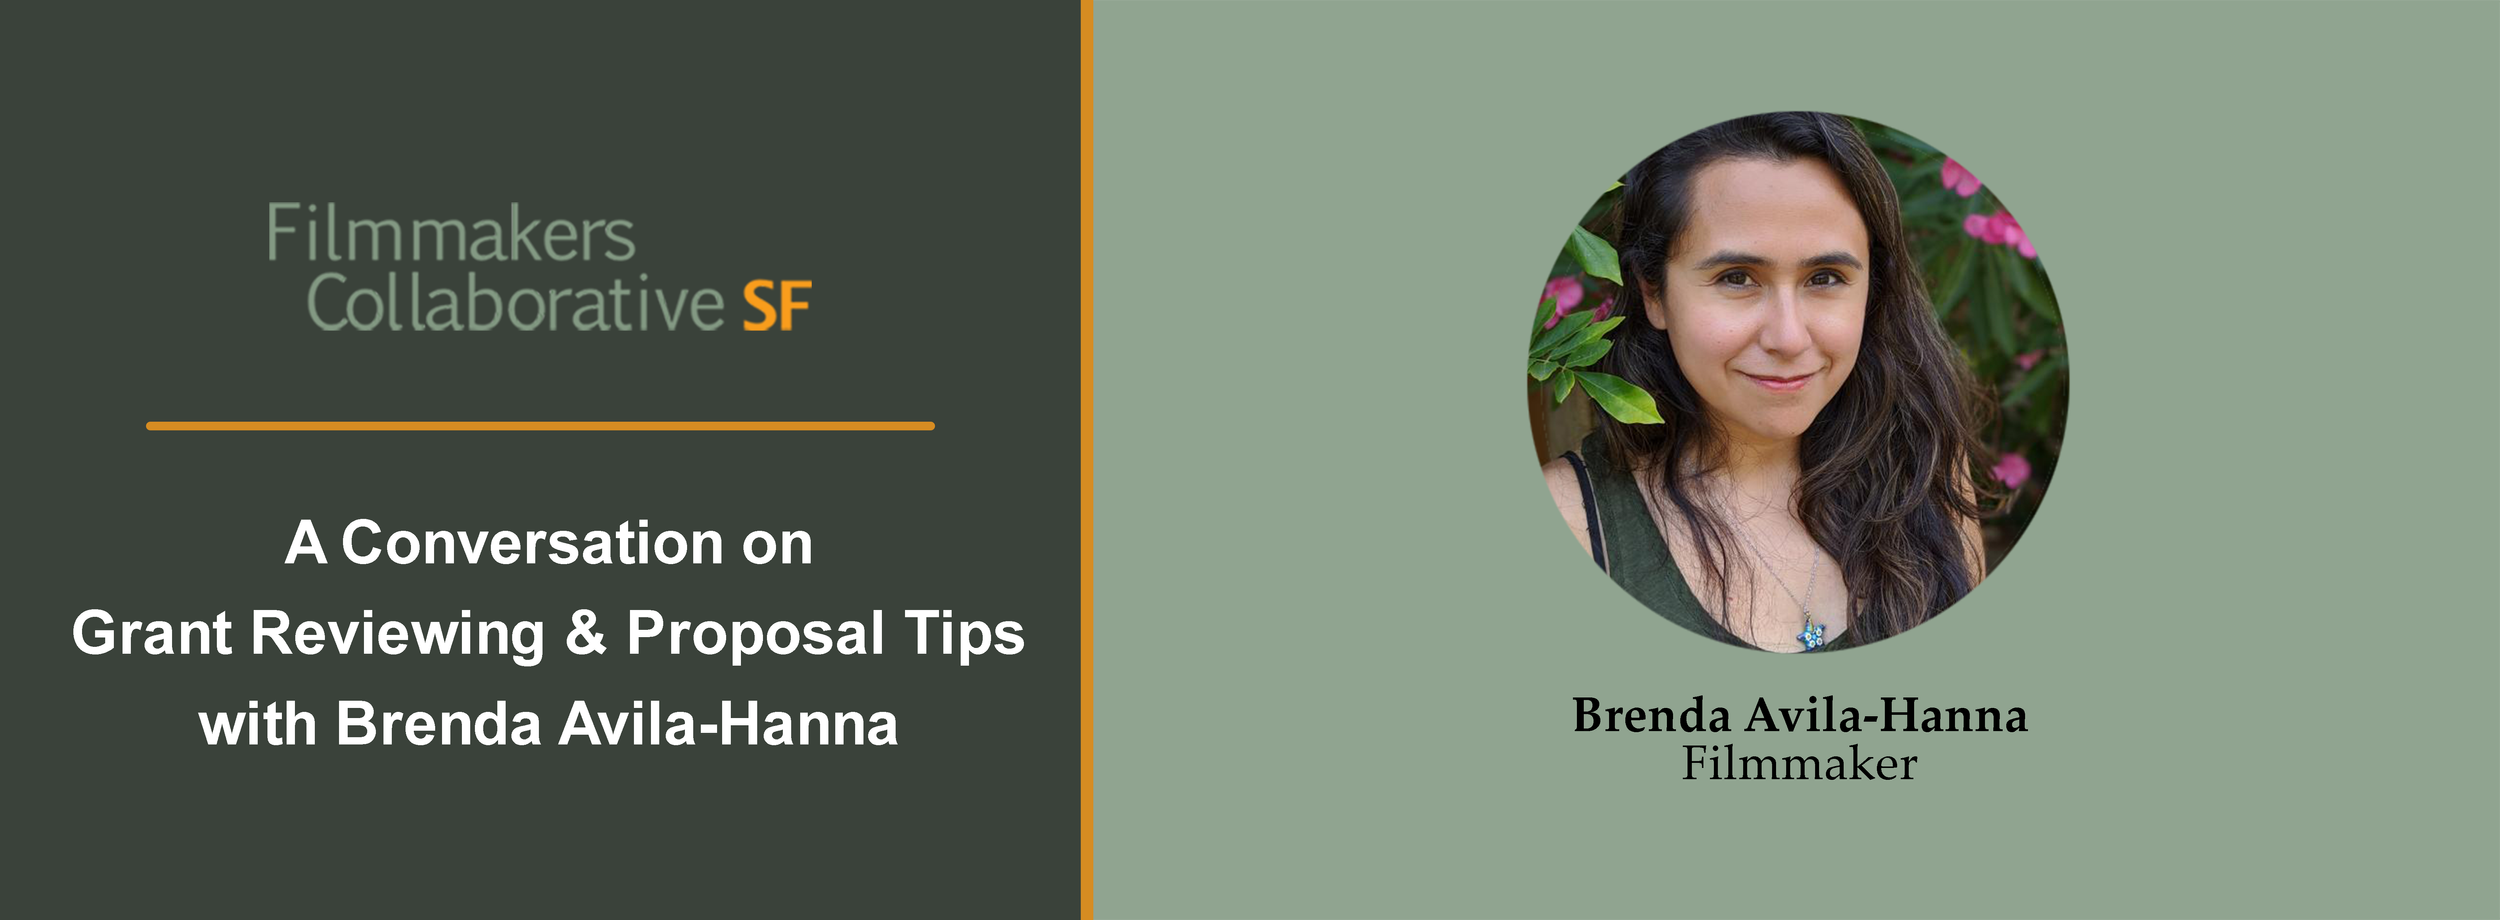 A Conversation on Grant Reviewing & Proposal Tips with Brenda Avila-Hanna